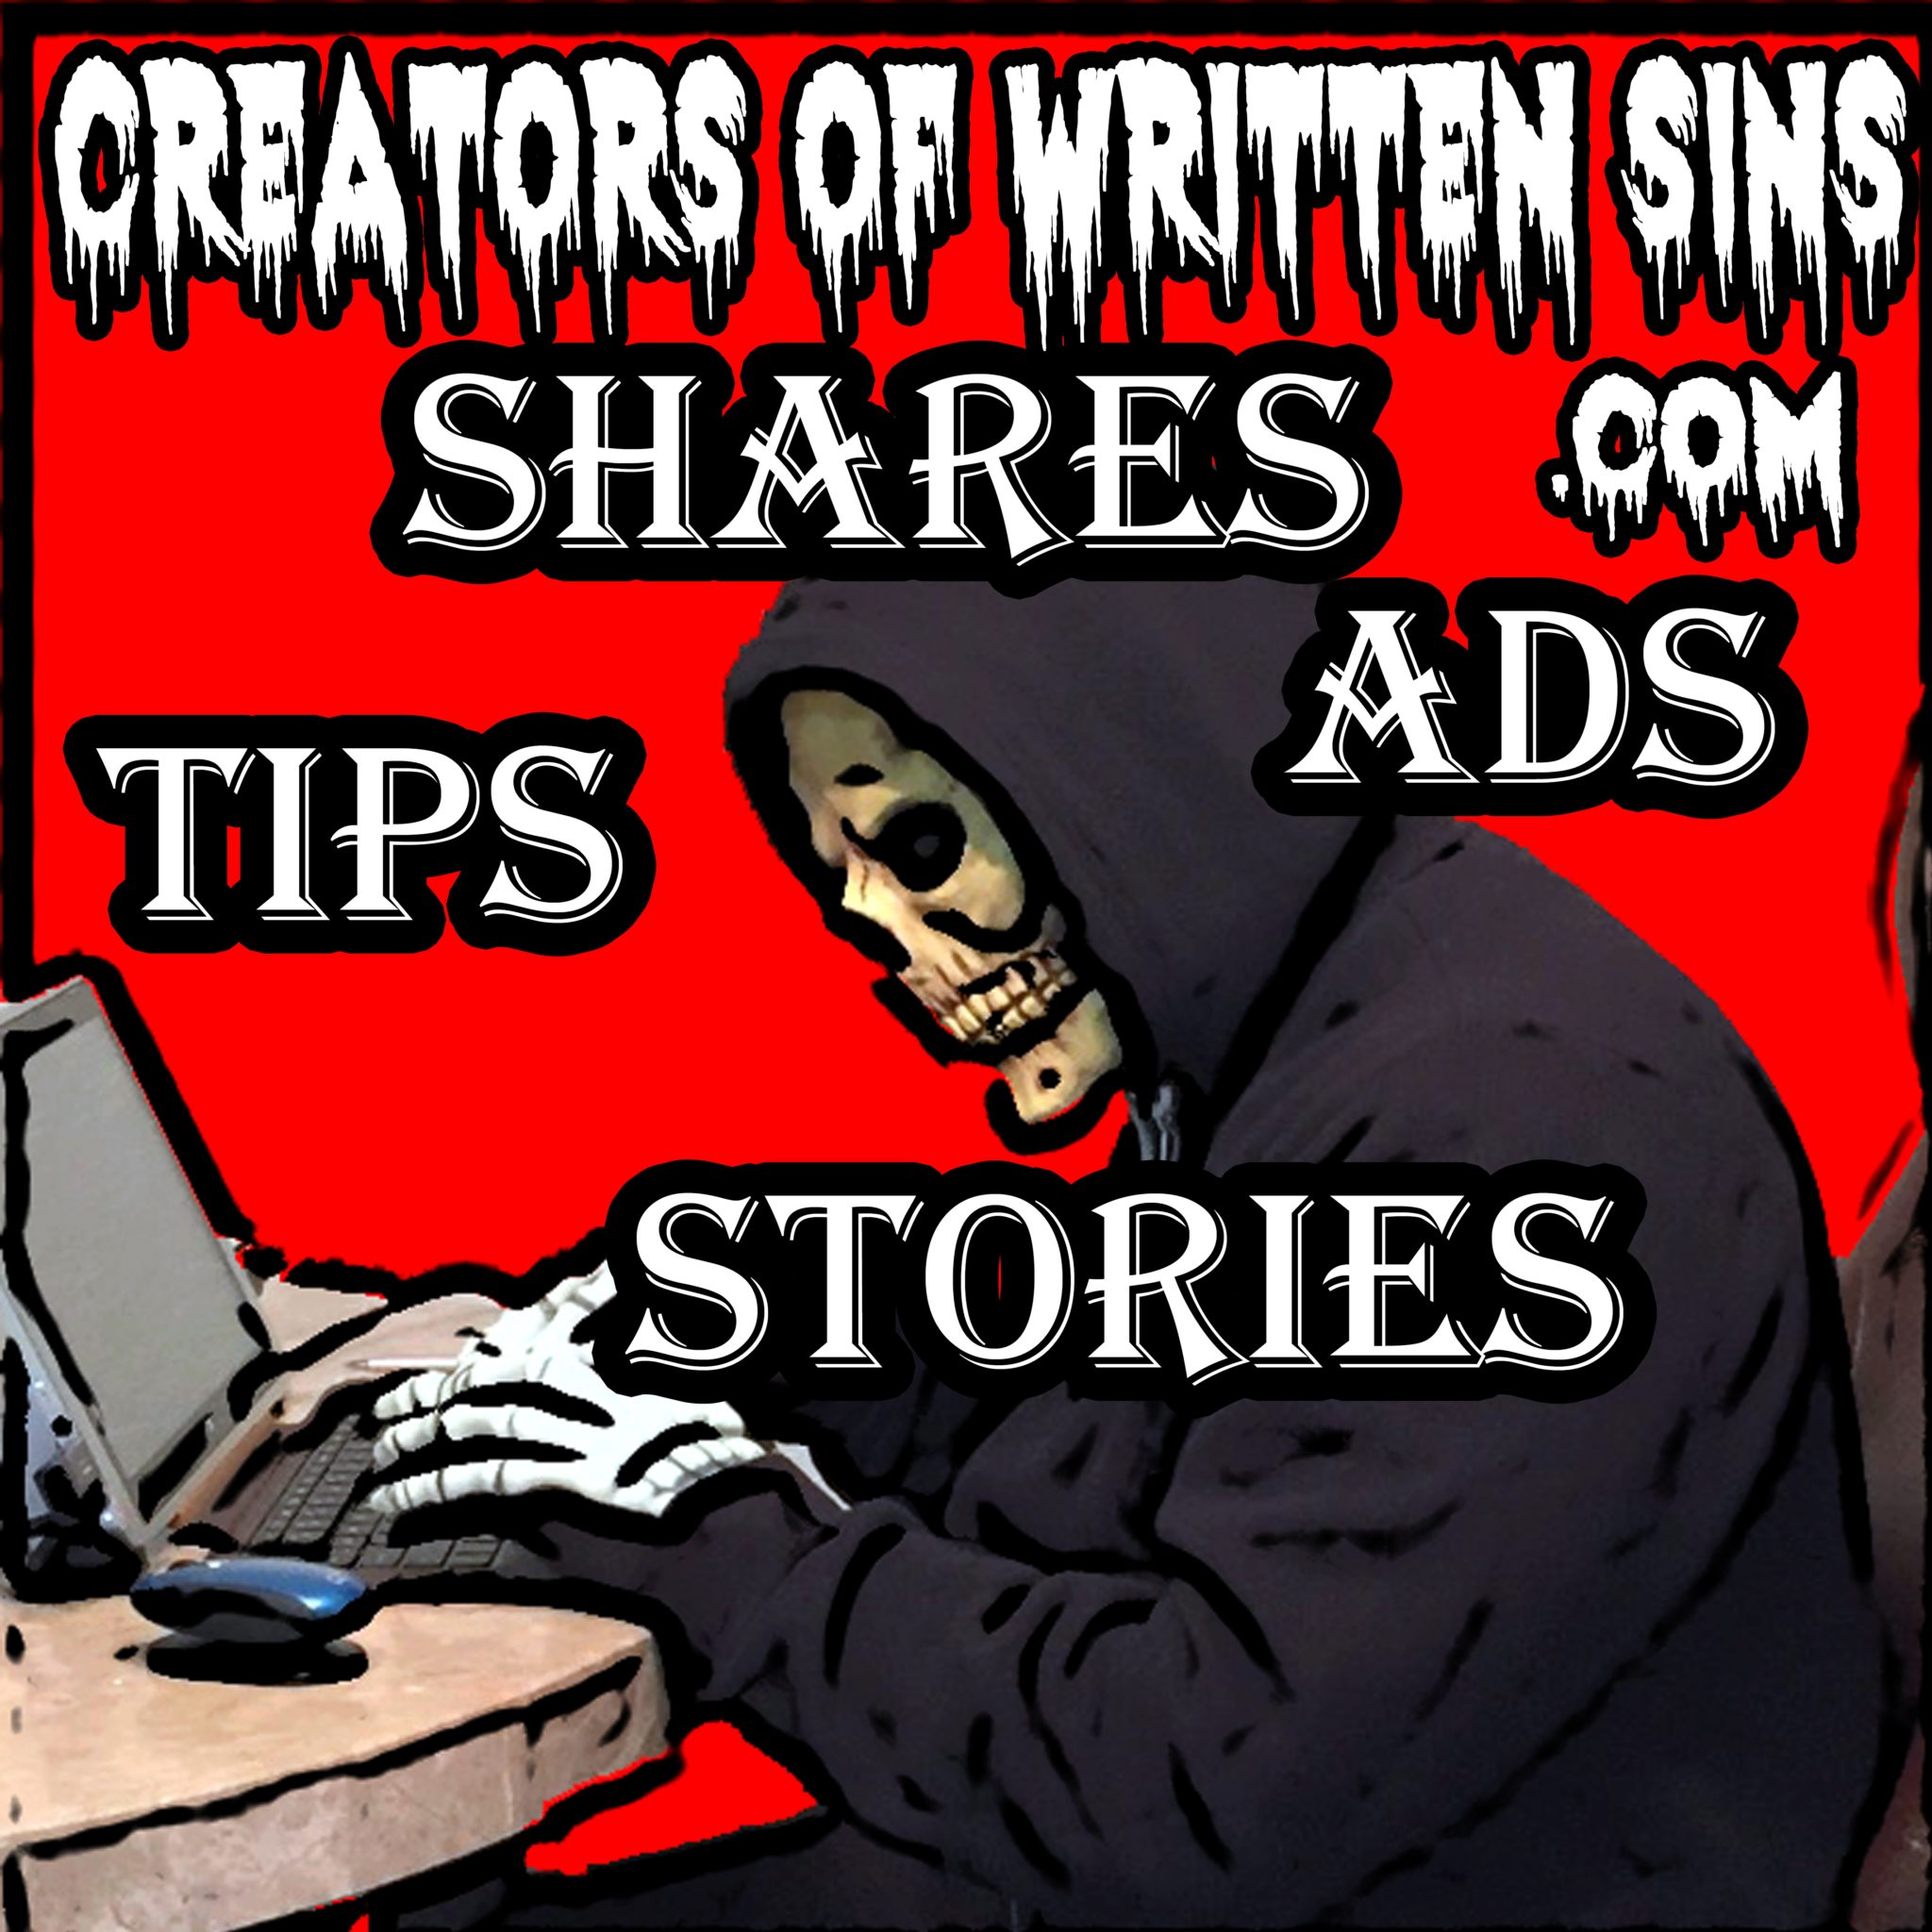 WSN NEWS:: TIPS and Stories can be up loaded to our Face book group or..